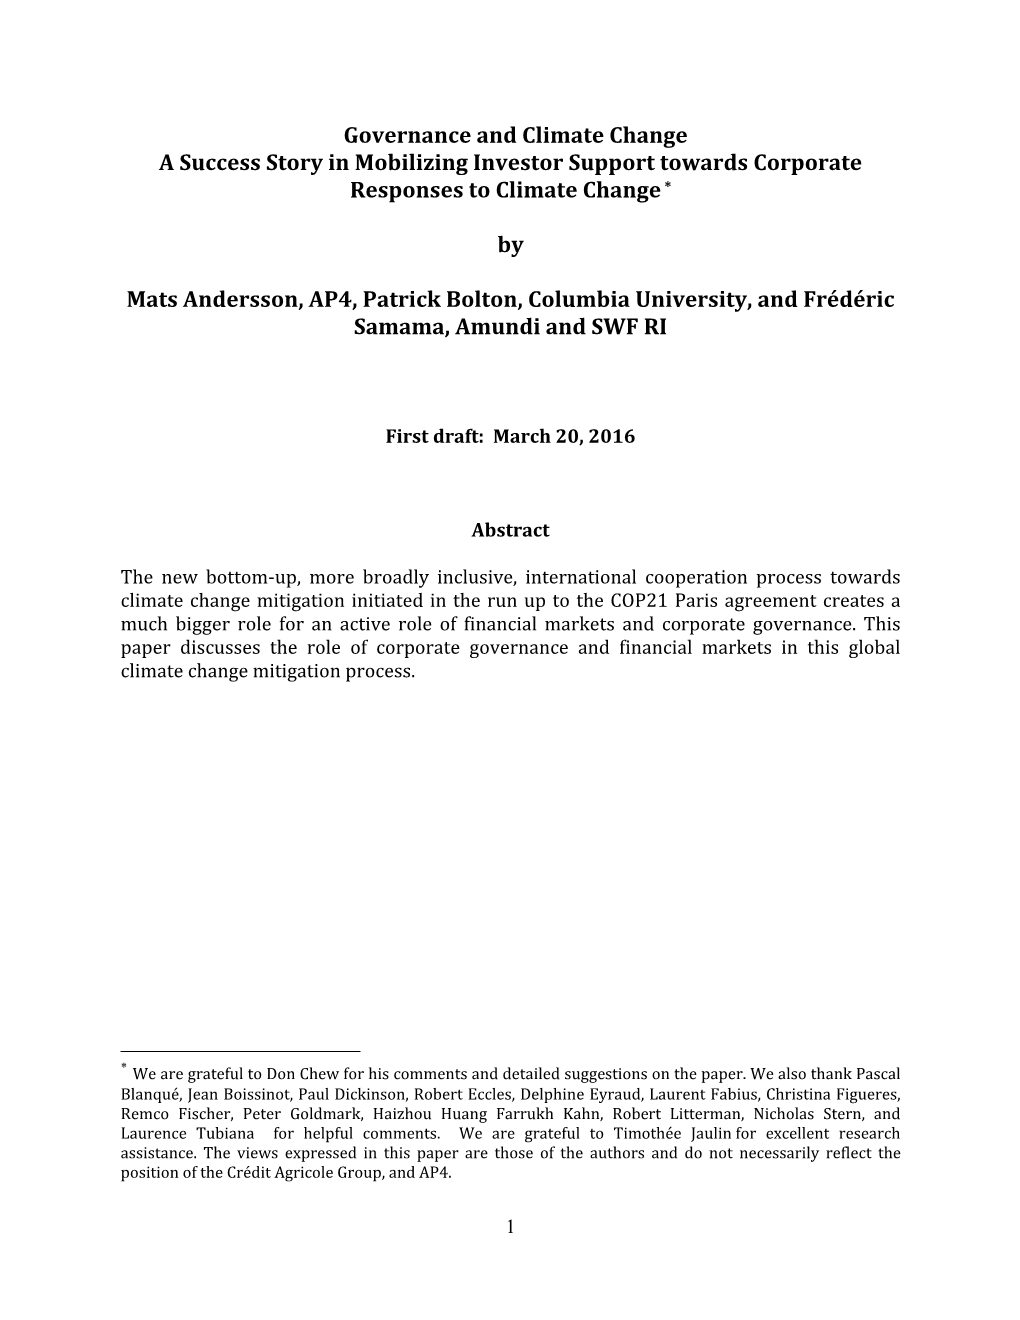 Governance and Climate Change a Success Story in Mobilizing Investor Support Towards Corporate Responses to Climate Change *